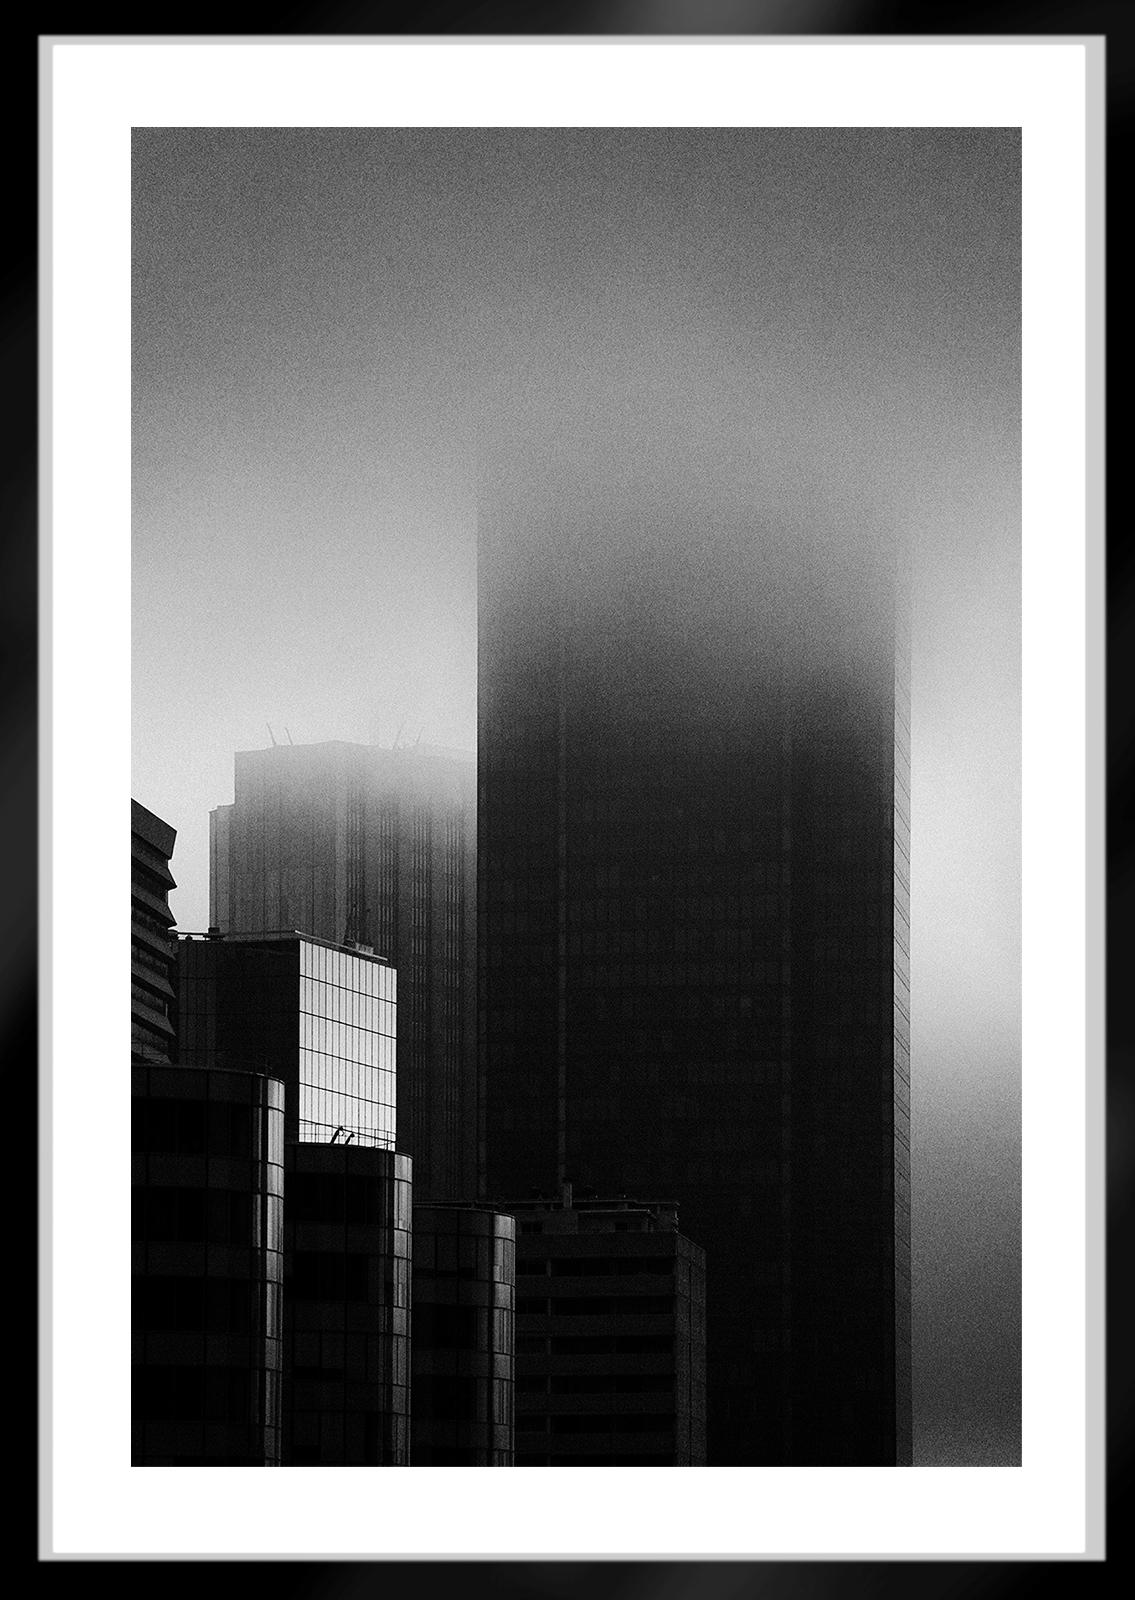  La Défense 1   -  Signed limited edition archival pigment print,  2004   -  Edition of 5
Paris, France

This is an Archival Pigment print on fiber based paper ( Hahnemühle Photo Rag® Baryta 315 gsm , Acid- and lignin-free paper, Museum quality for